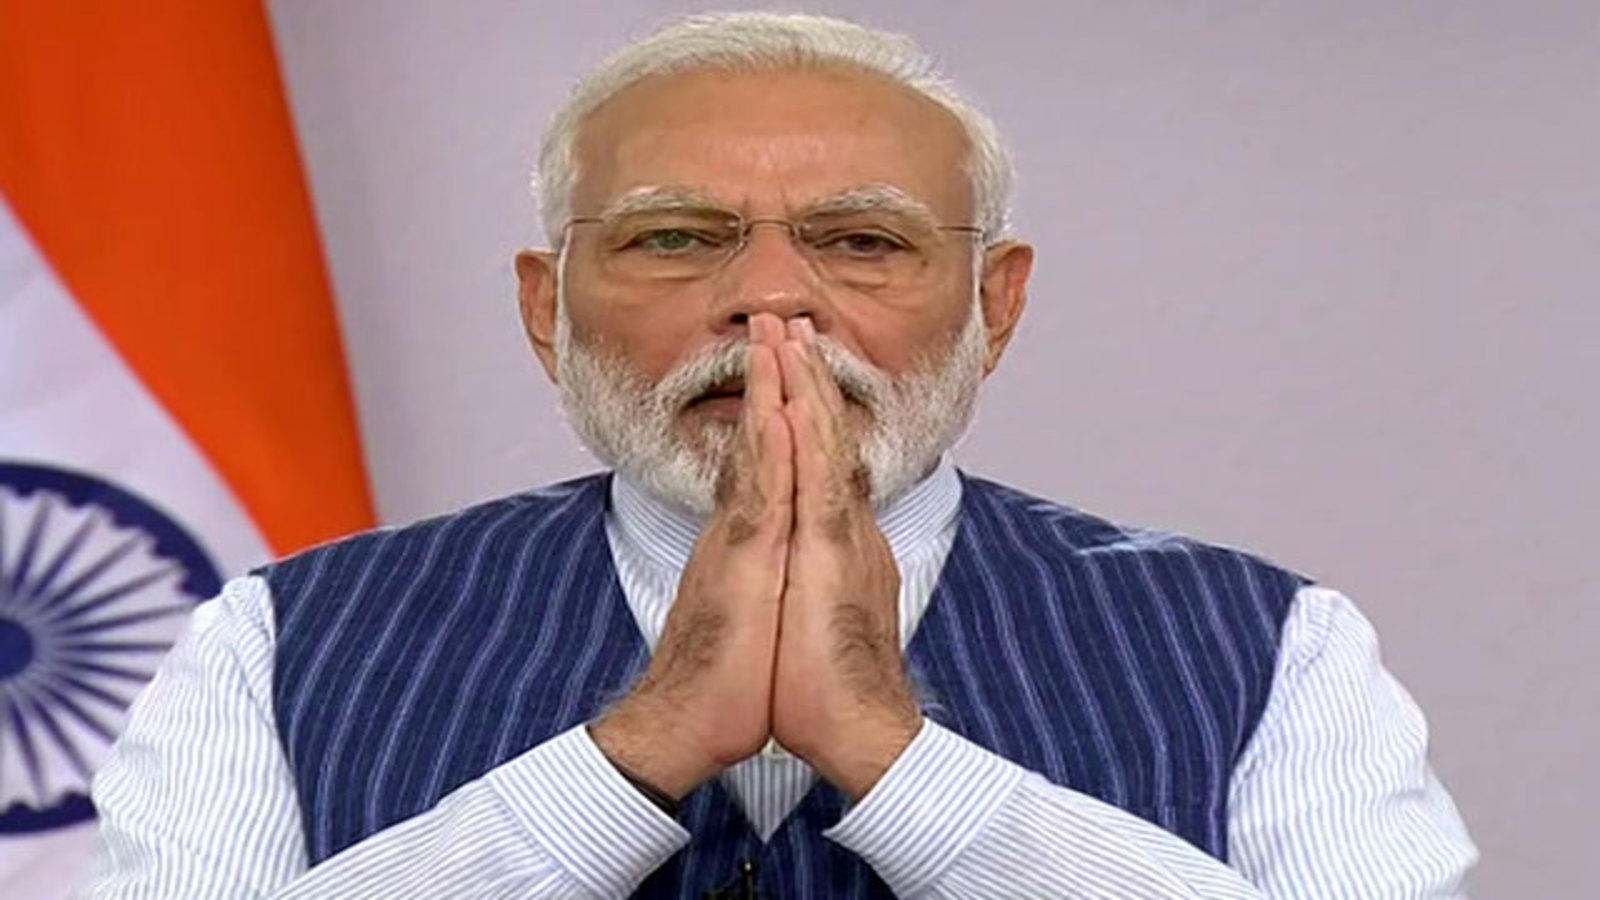 "Light Candles On Sunday At 9 pm To Show Solidarity Amid Lockdown": PM Modi